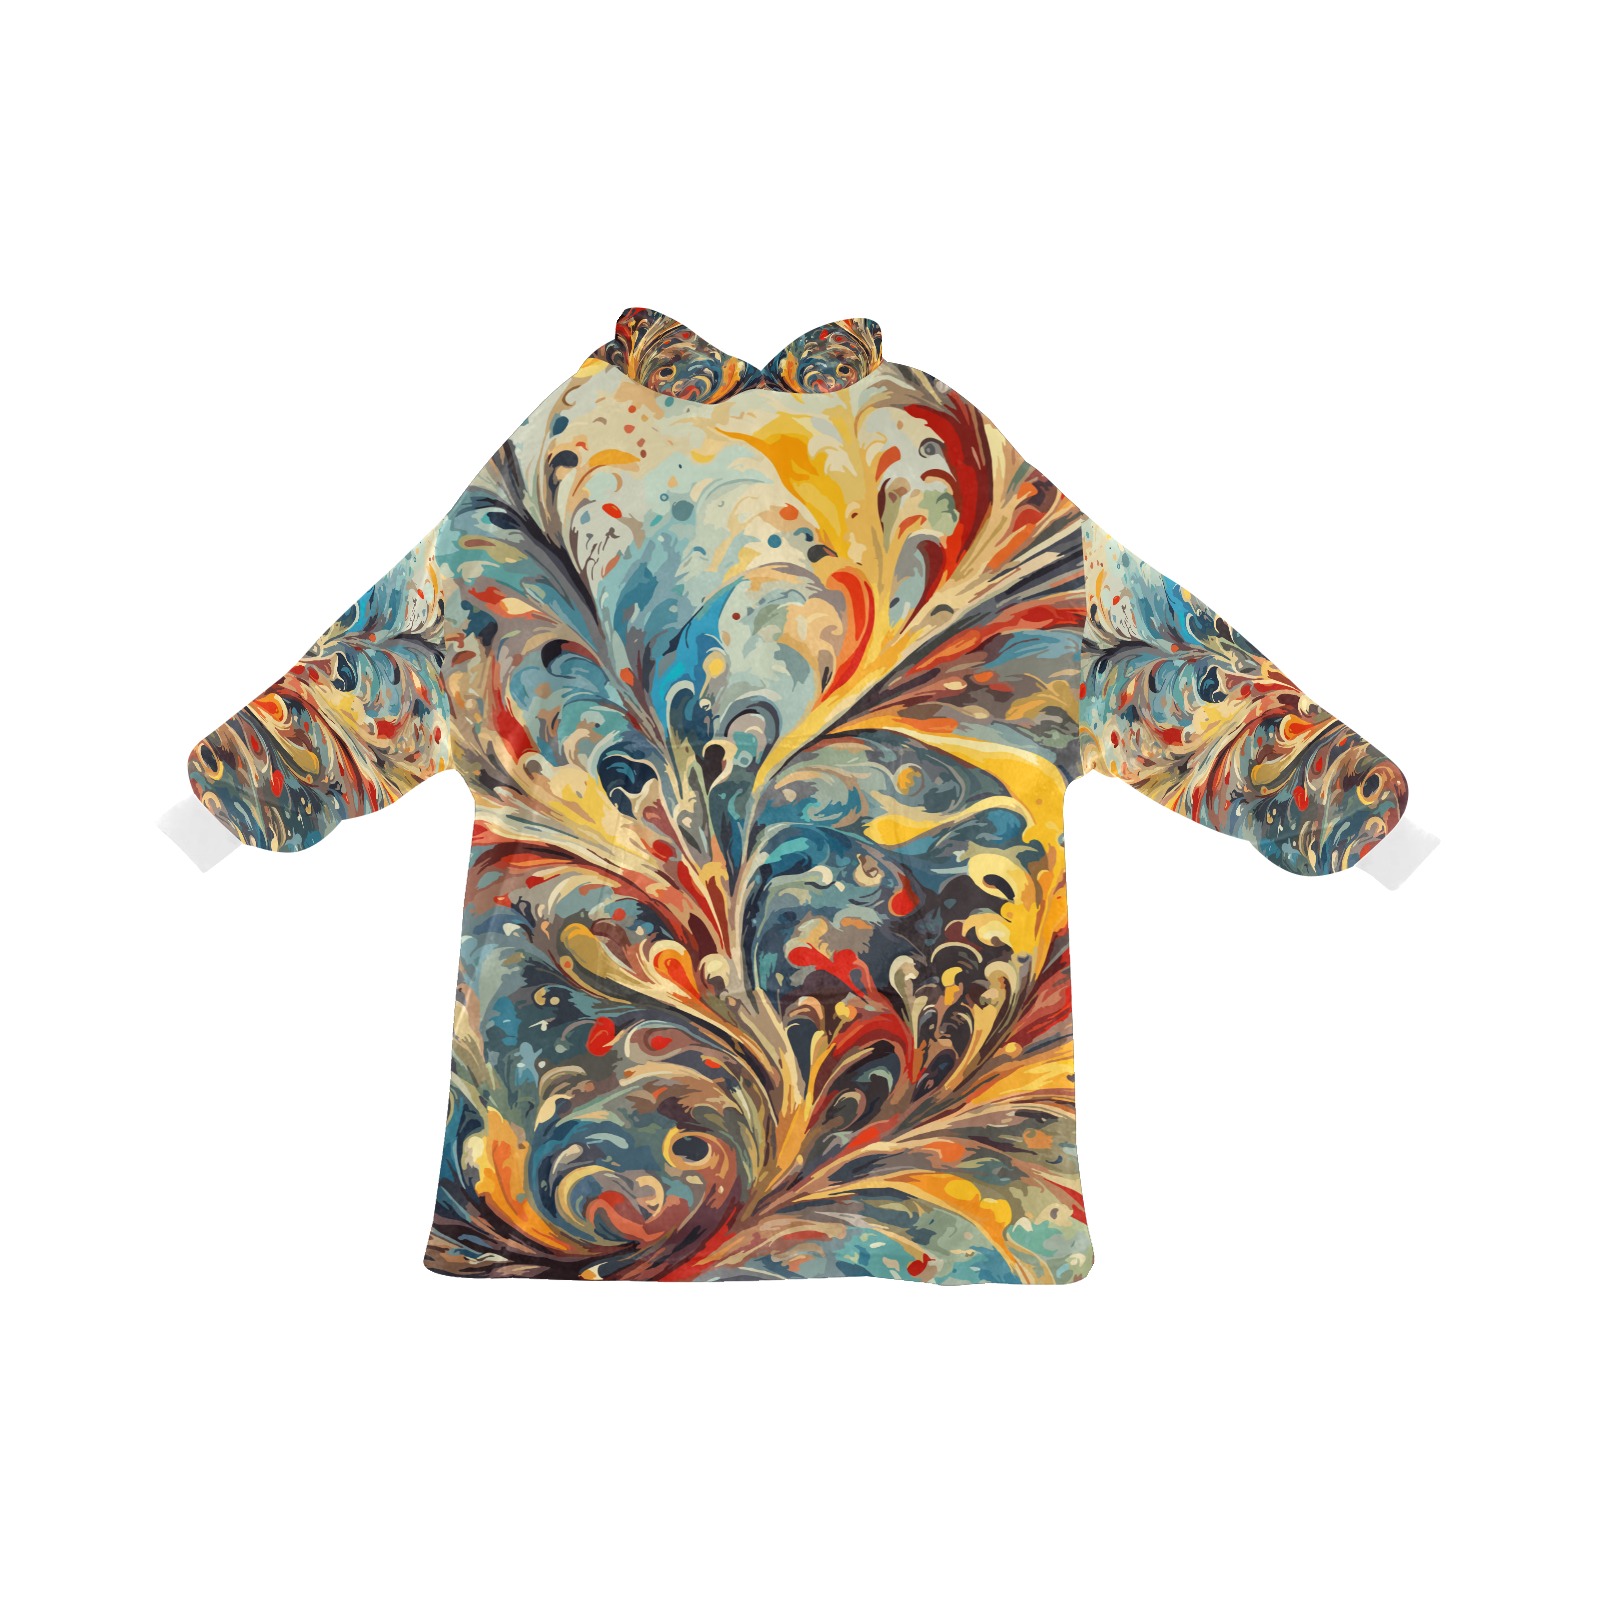 Stunning abstract floral ornament. Colorful art. Blanket Hoodie for Women